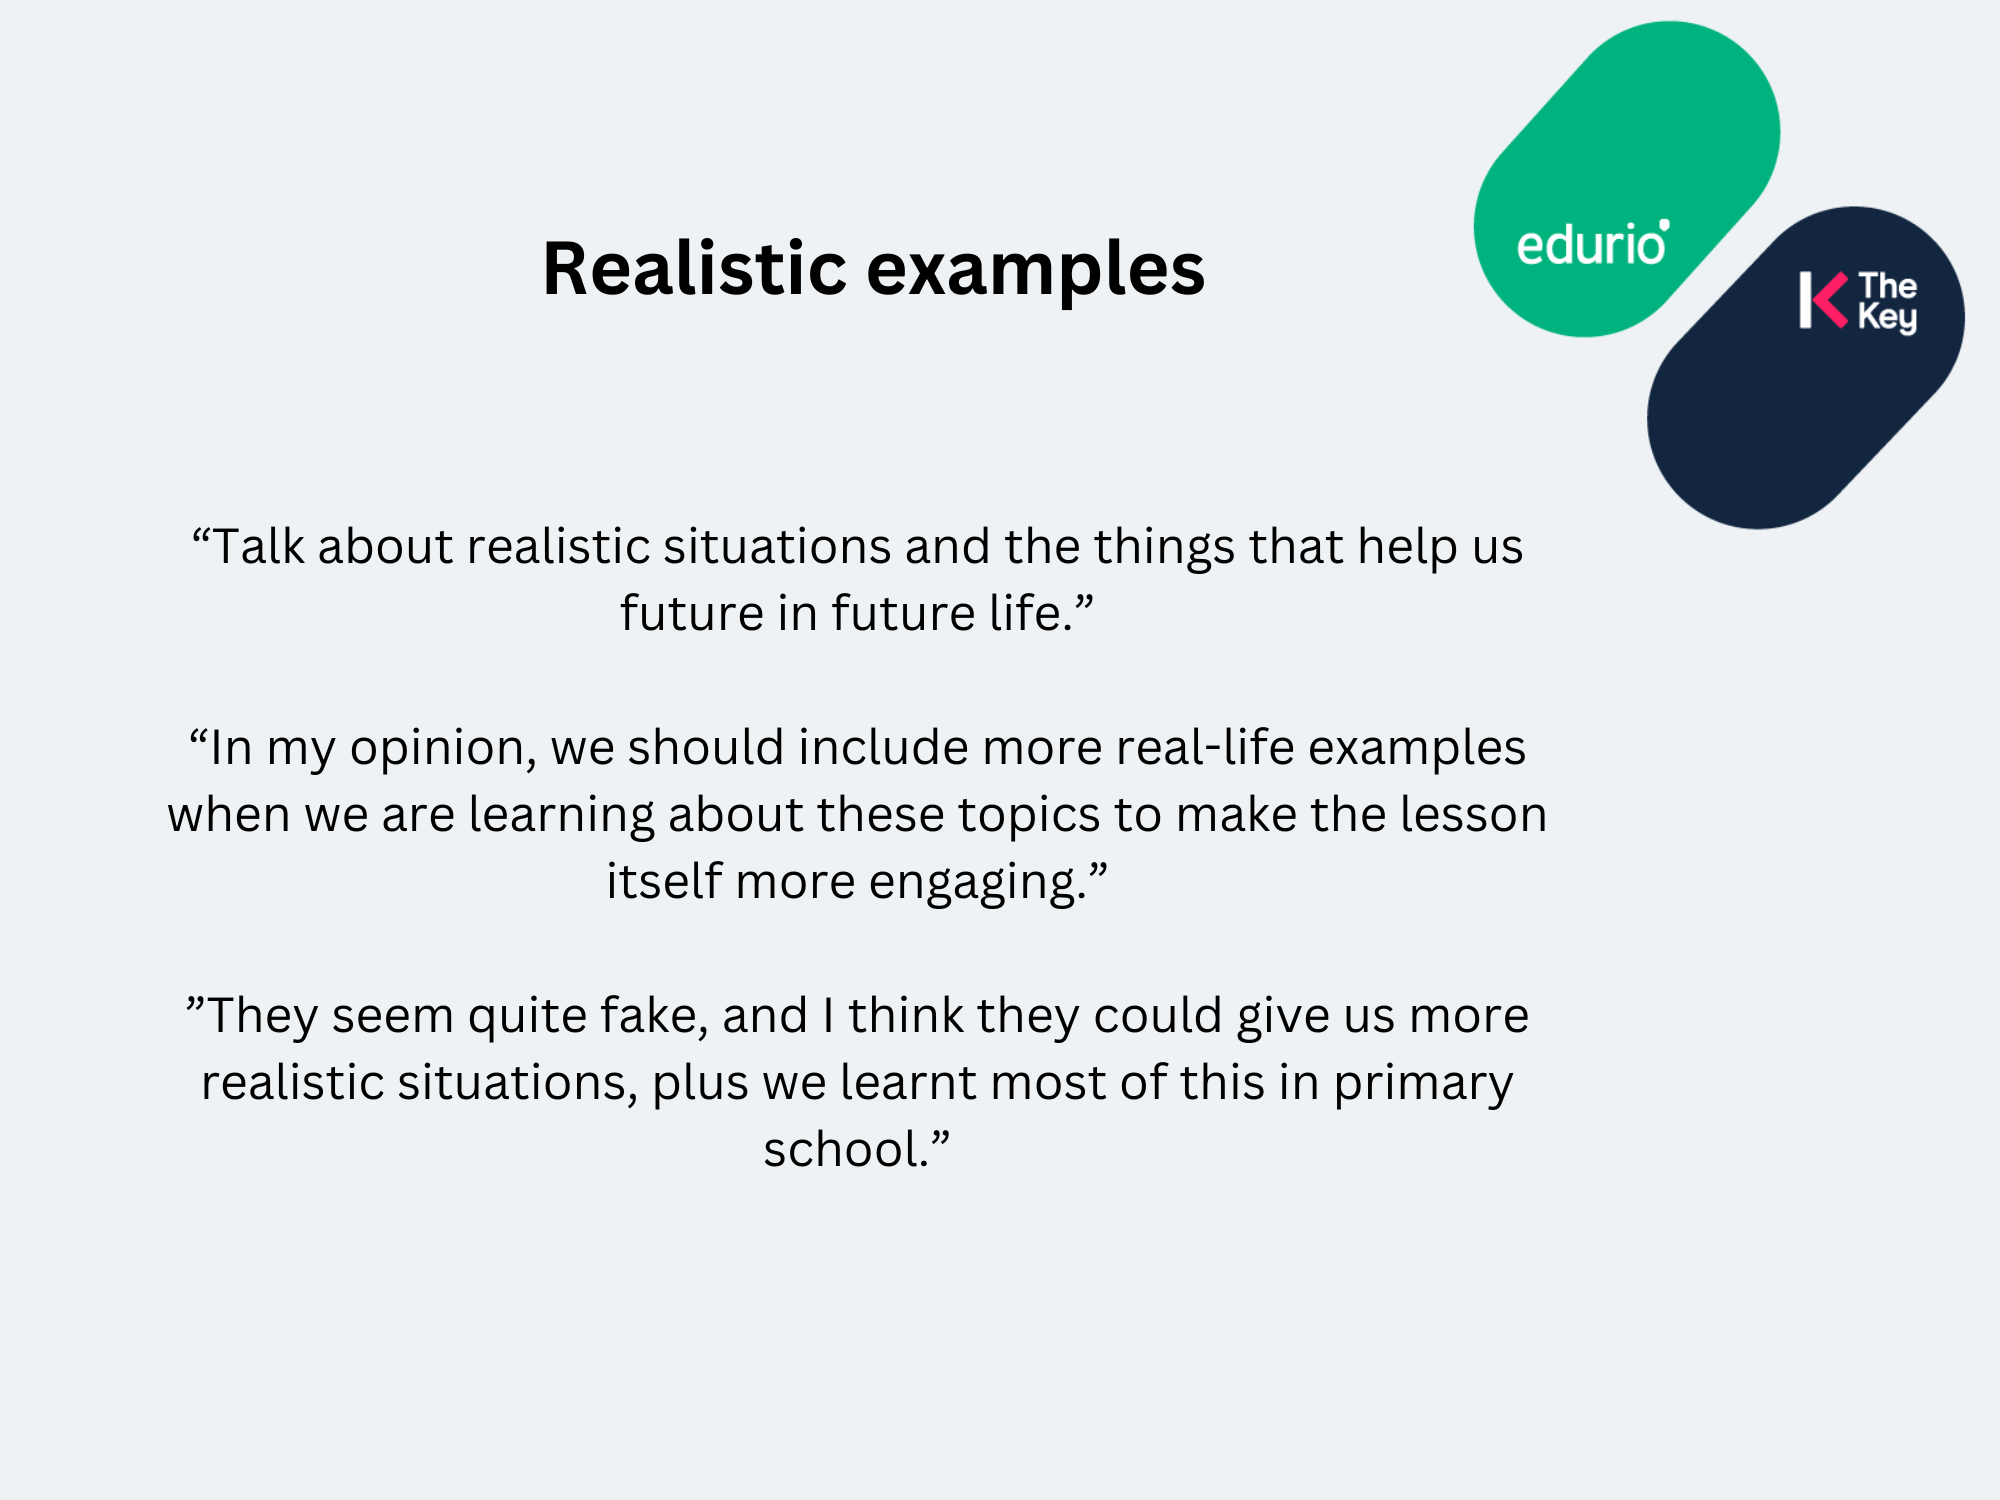 Quotes from pupils about realistic examples in the RSE curriculum.
“Talk about realistic situations and the things that help us future in future life.”
“In my opinion, we should include more real-life examples when we are learning about these topics to make the lesson itself more engaging.”
”They seem quite fake, and I think they could give us more realistic situations, plus we learnt most of this in primary school.”